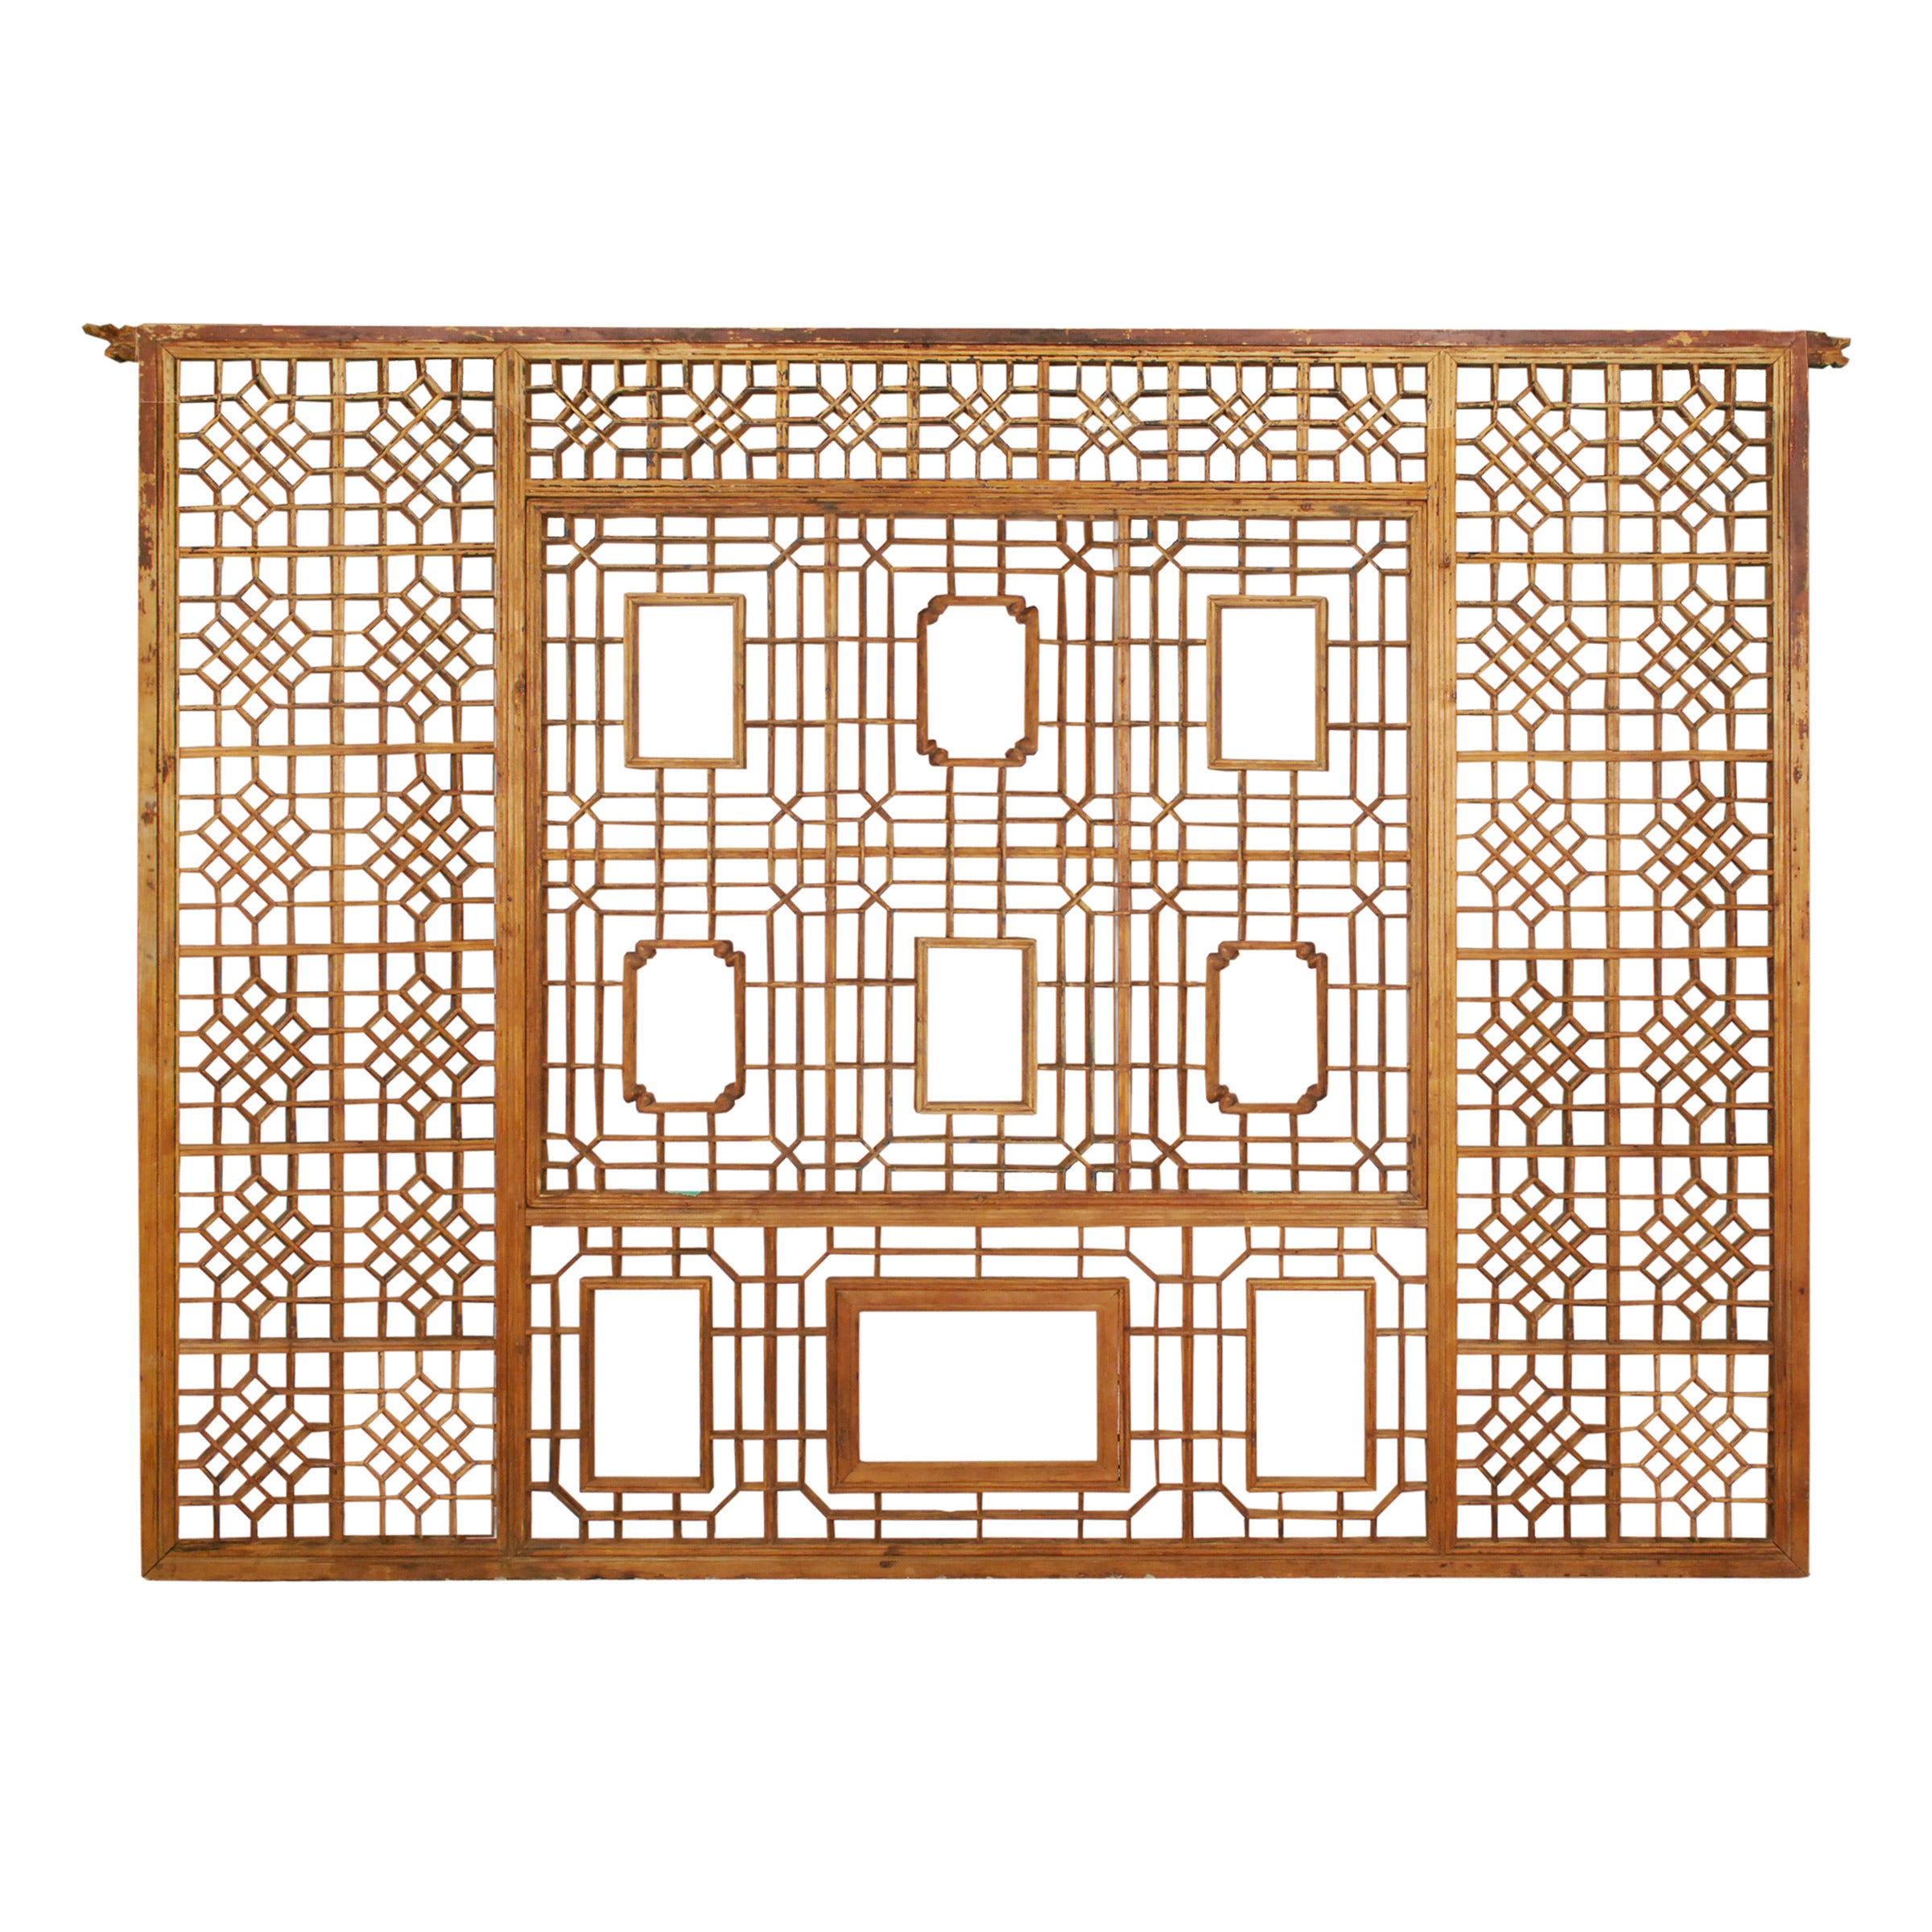 A Grand Early 20th Century Chinese Lattice Panel